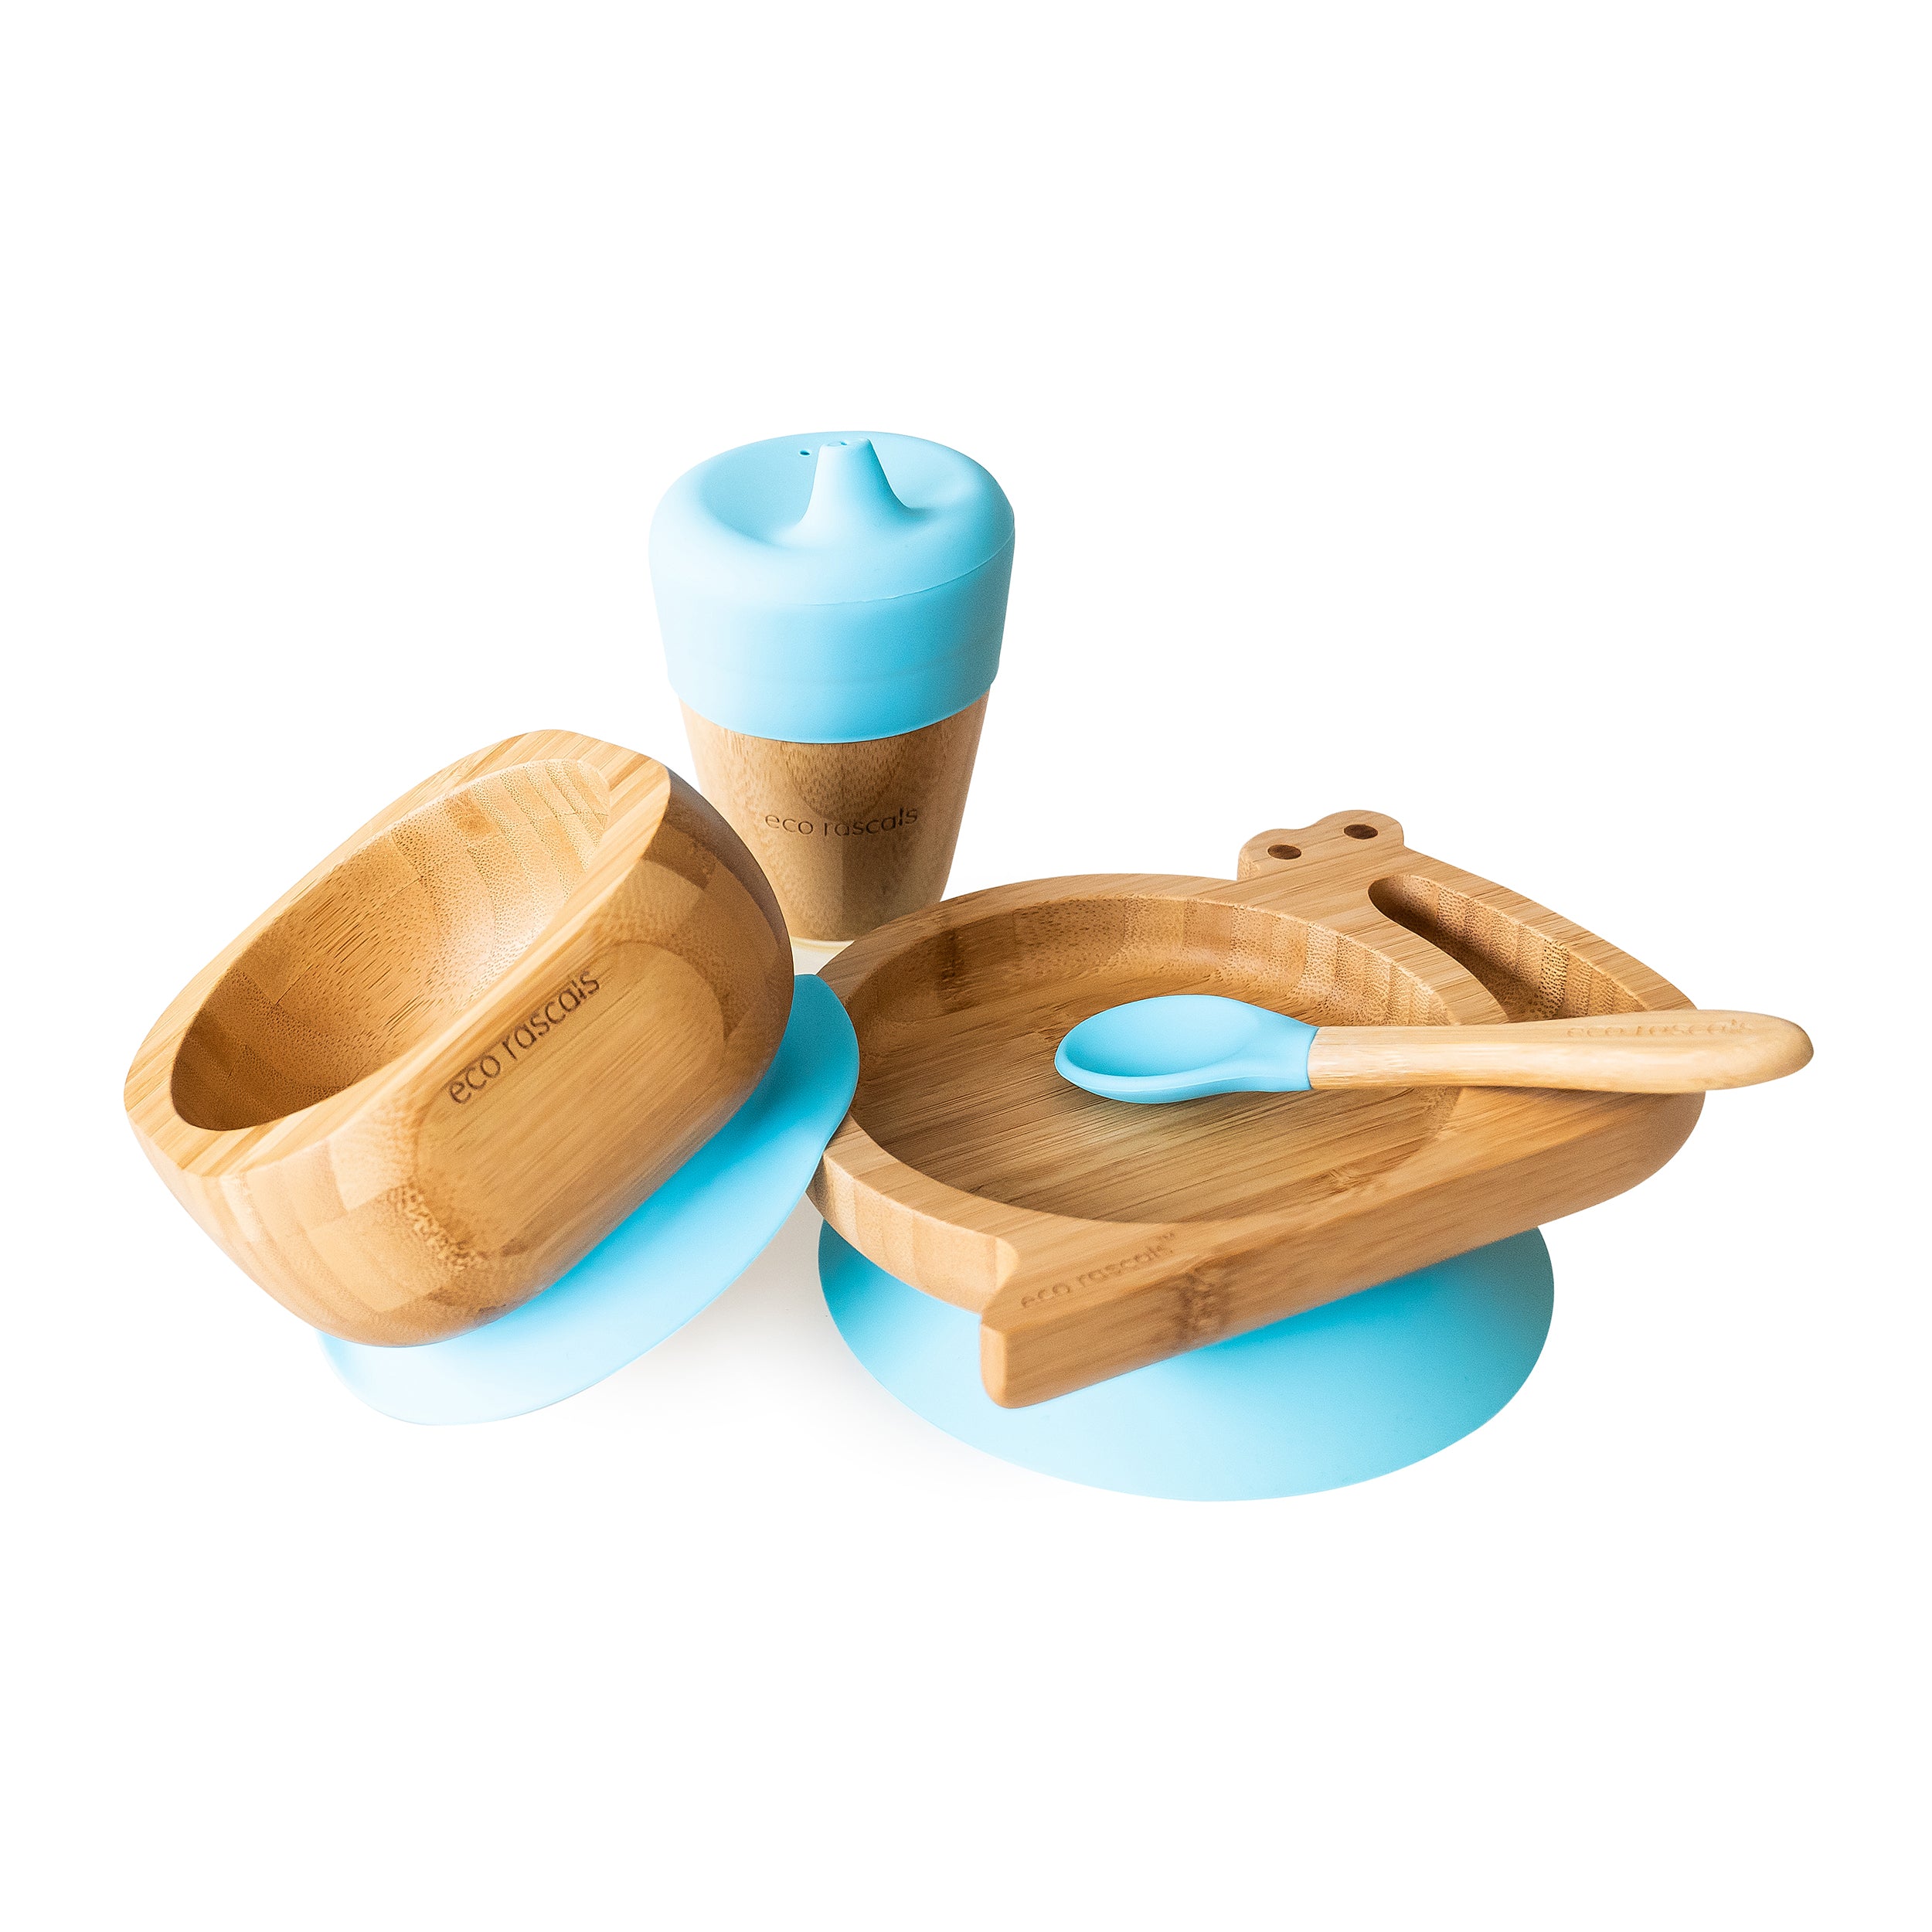 Bamboo Snail Mealtime Gift Set - Blue